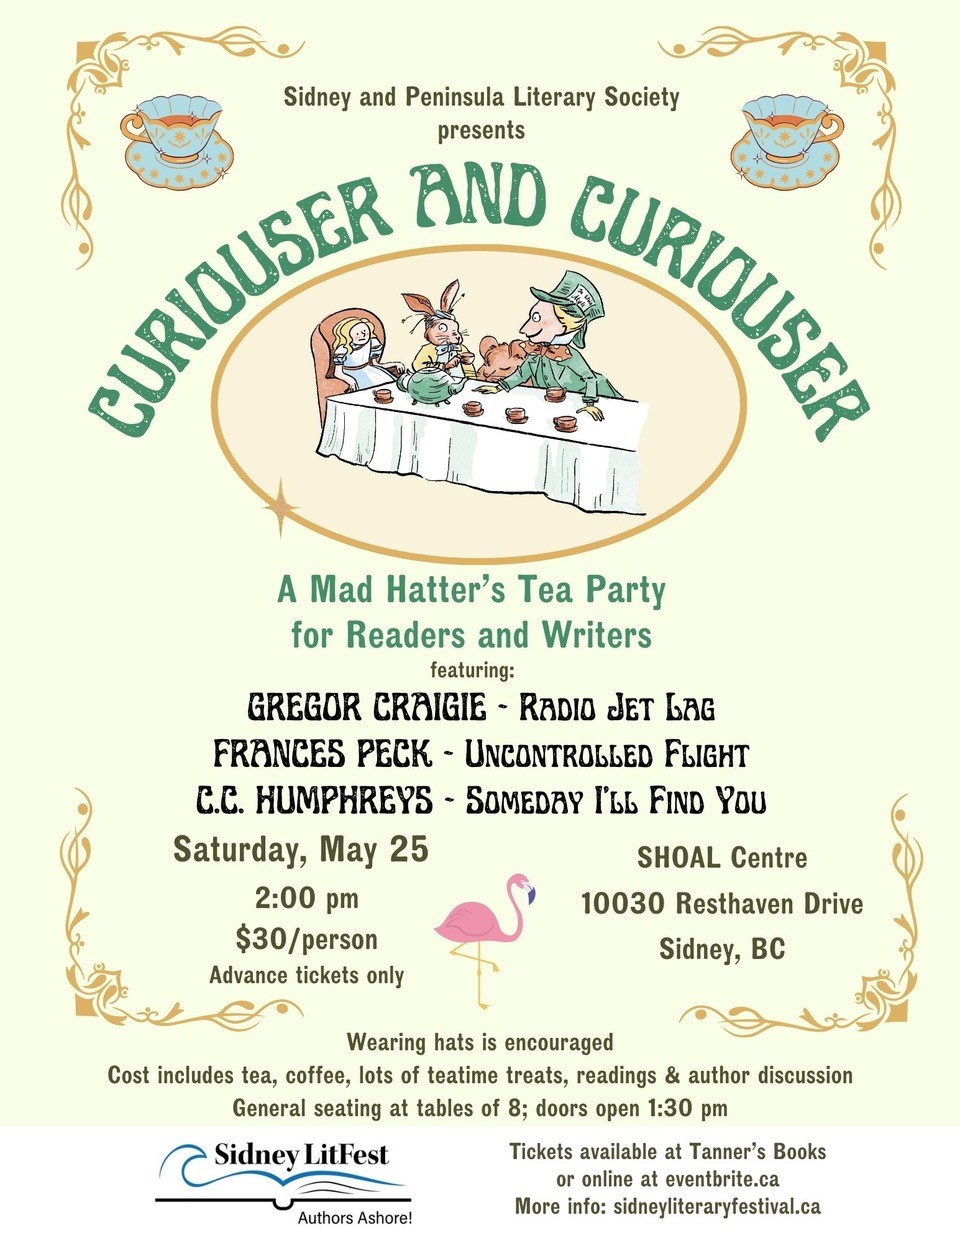 Poster from the Sidney and Peninsula Literary Society announcing "Curiouser and Curiouser, A Mad Hatter's Tea Part for Readers and Writers." The poster notes featured authors Gregor Craigie, Frances Peck and C.C. Humphreys. Saturday, May 25, 2pm, $30 per person, Shoal Centre, 10030 Resthaven Drive, Sidney, BC